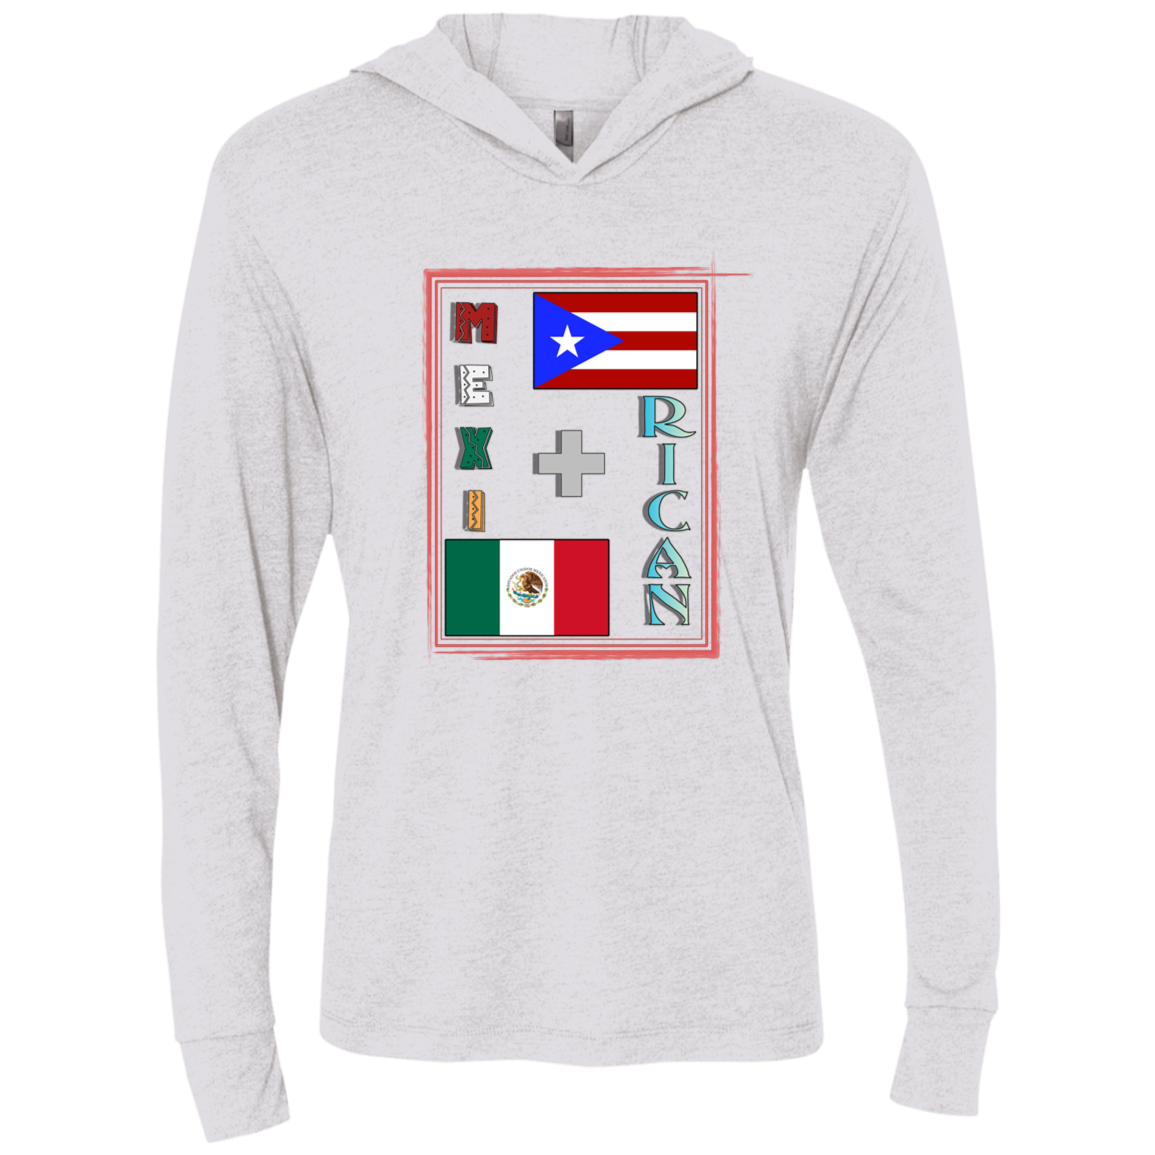 Mexi + Rican Unisex Hooded T-Shirt - Puerto Rican Pride